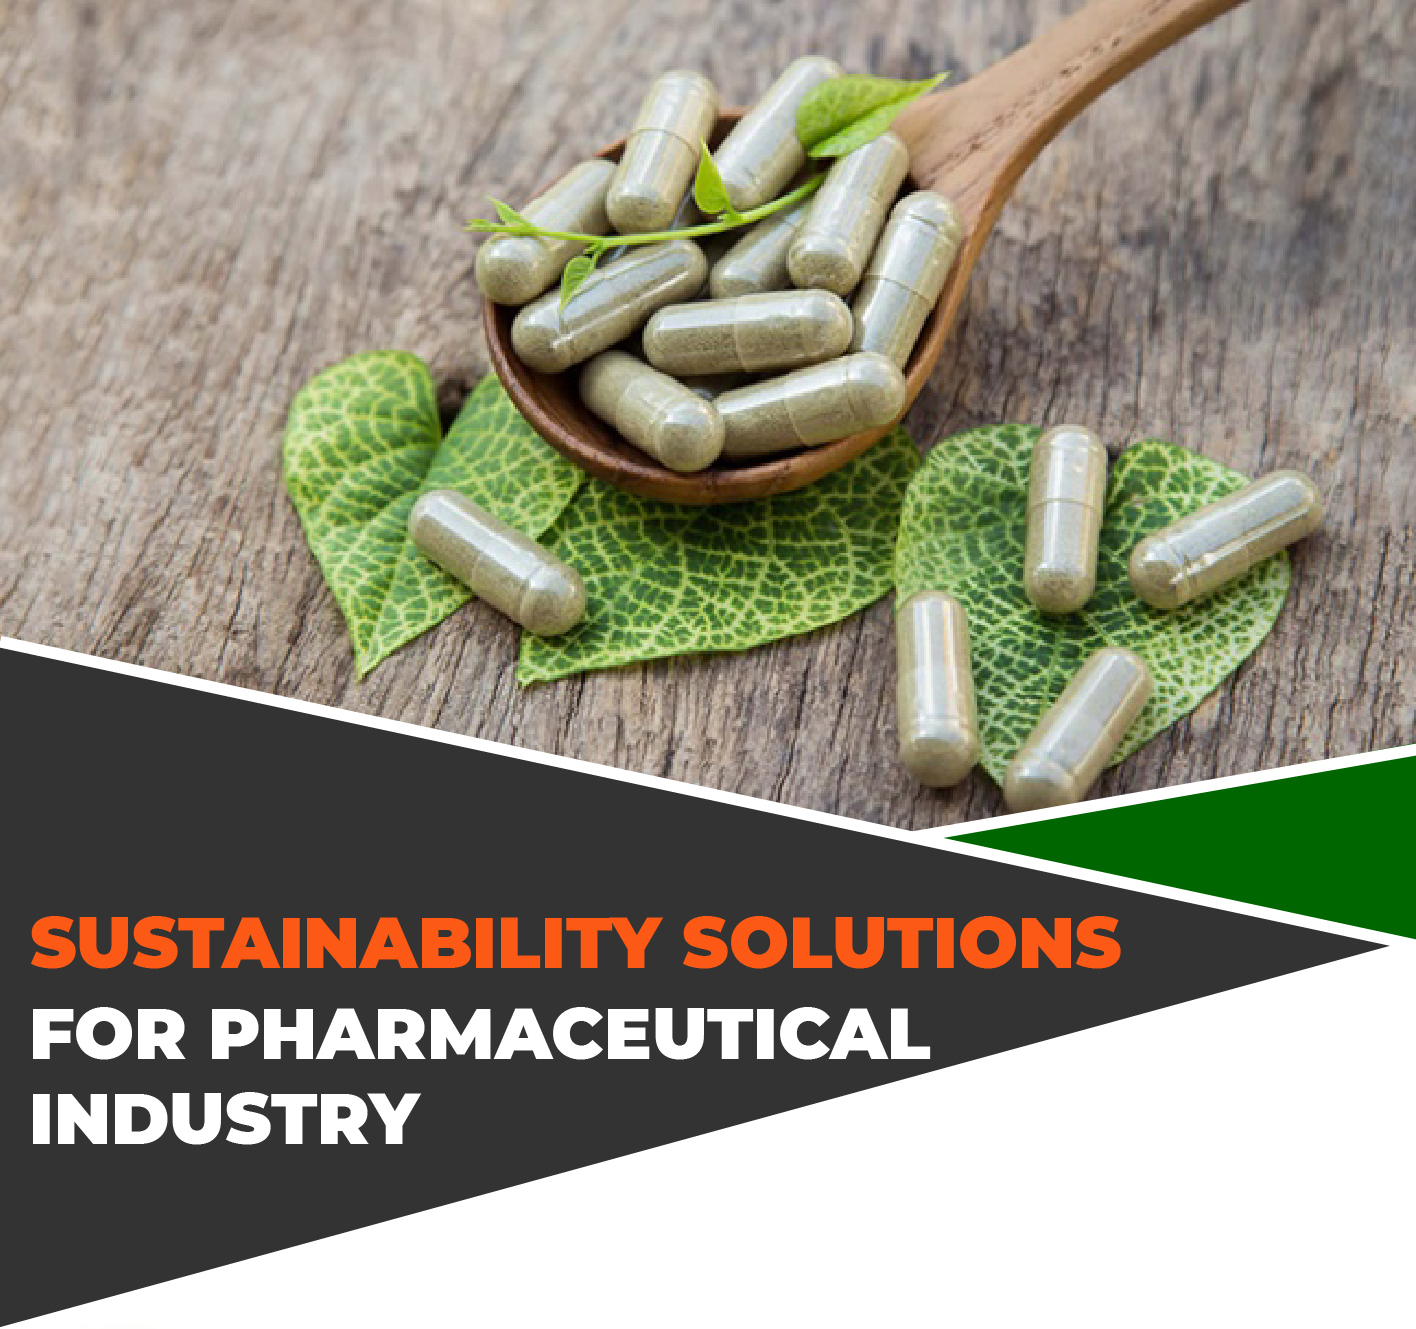 SUSTAINABILITY SOLUTIONS FOR PHARMACEUTICAL INDUSTRY